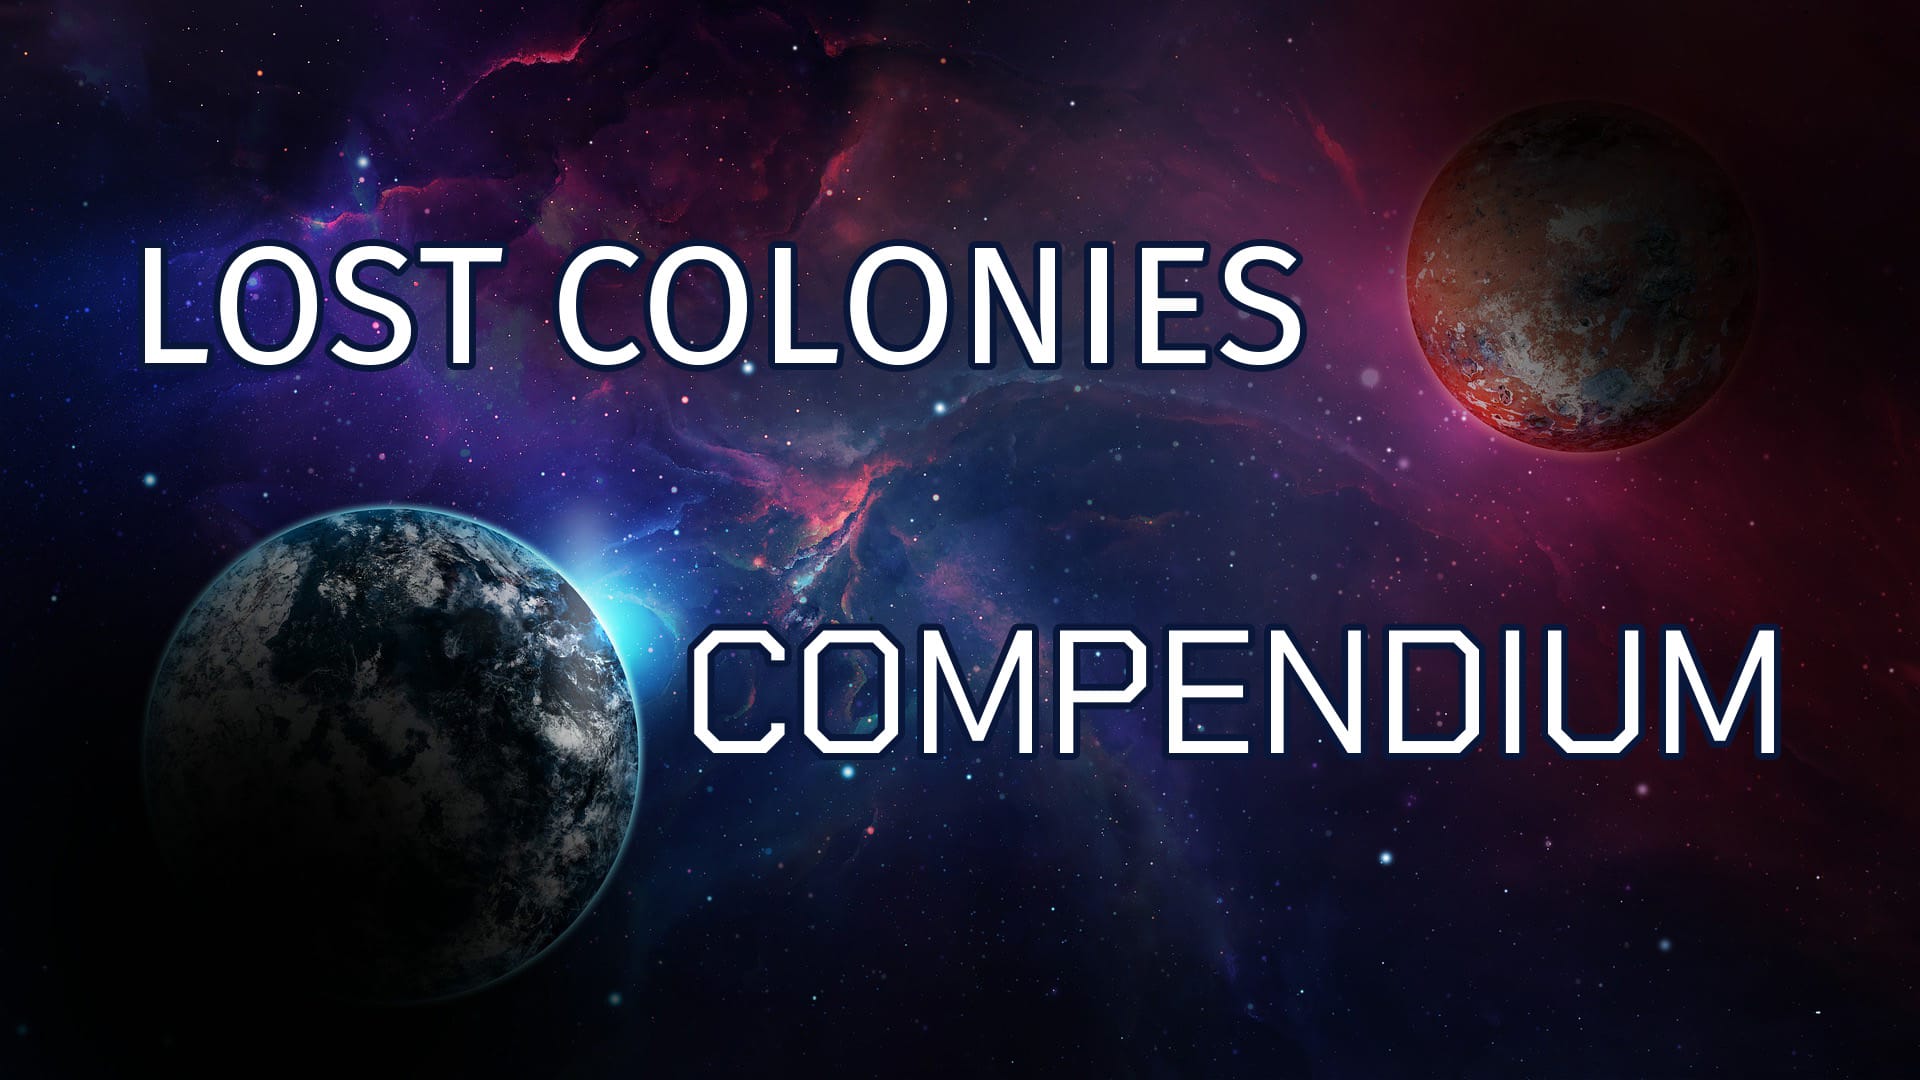 "Lost Colonies Compendium." Two planets against a starry backdrop.